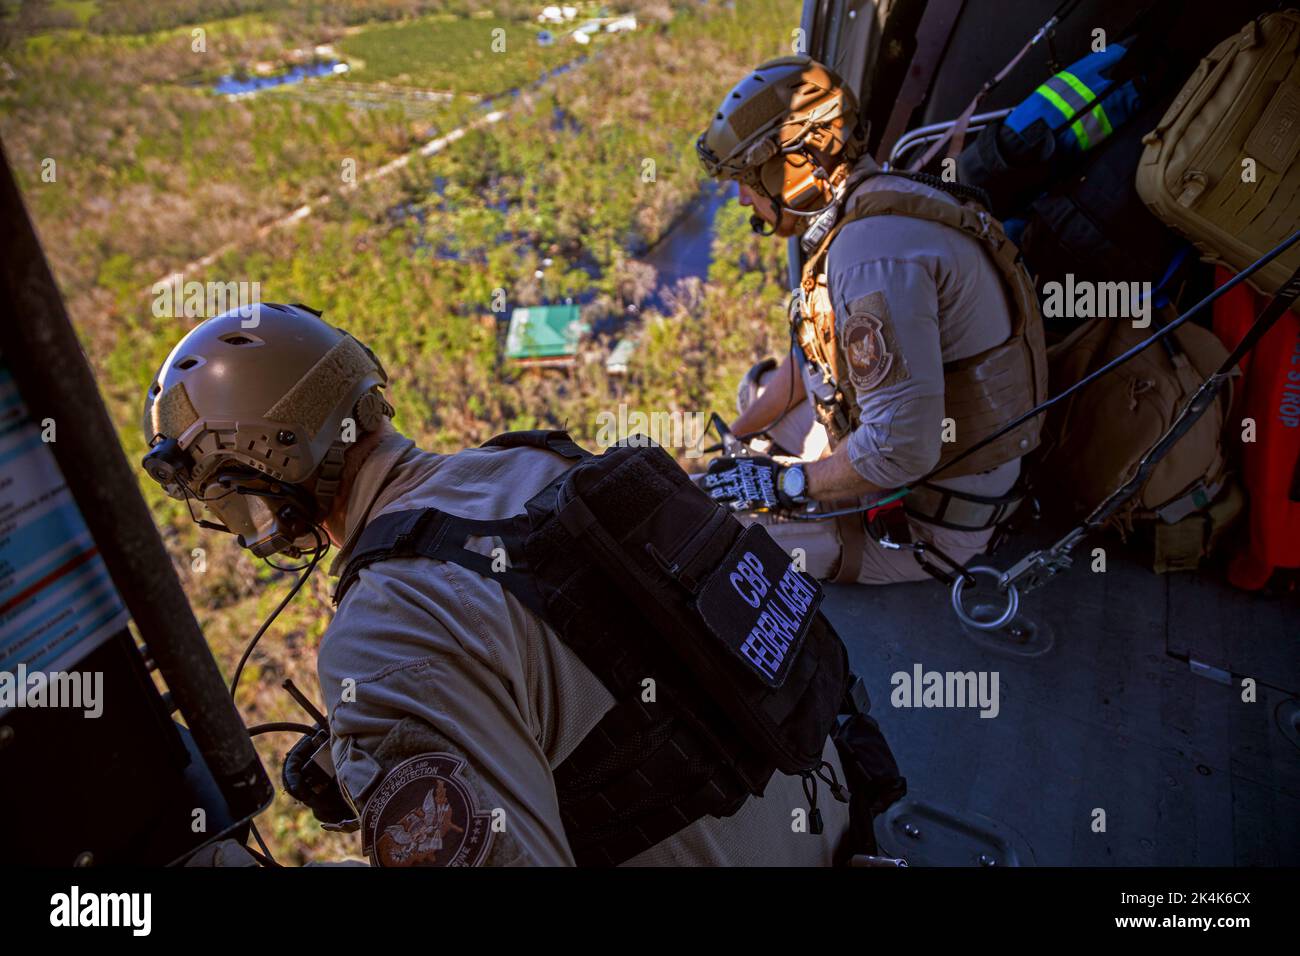 NEAR FORT MYERS, FLORIDA, USA - 30 September 2022 - US Customs and Border Protection pararescuemen look for survivors in the aftermath along Florida's Stock Photo